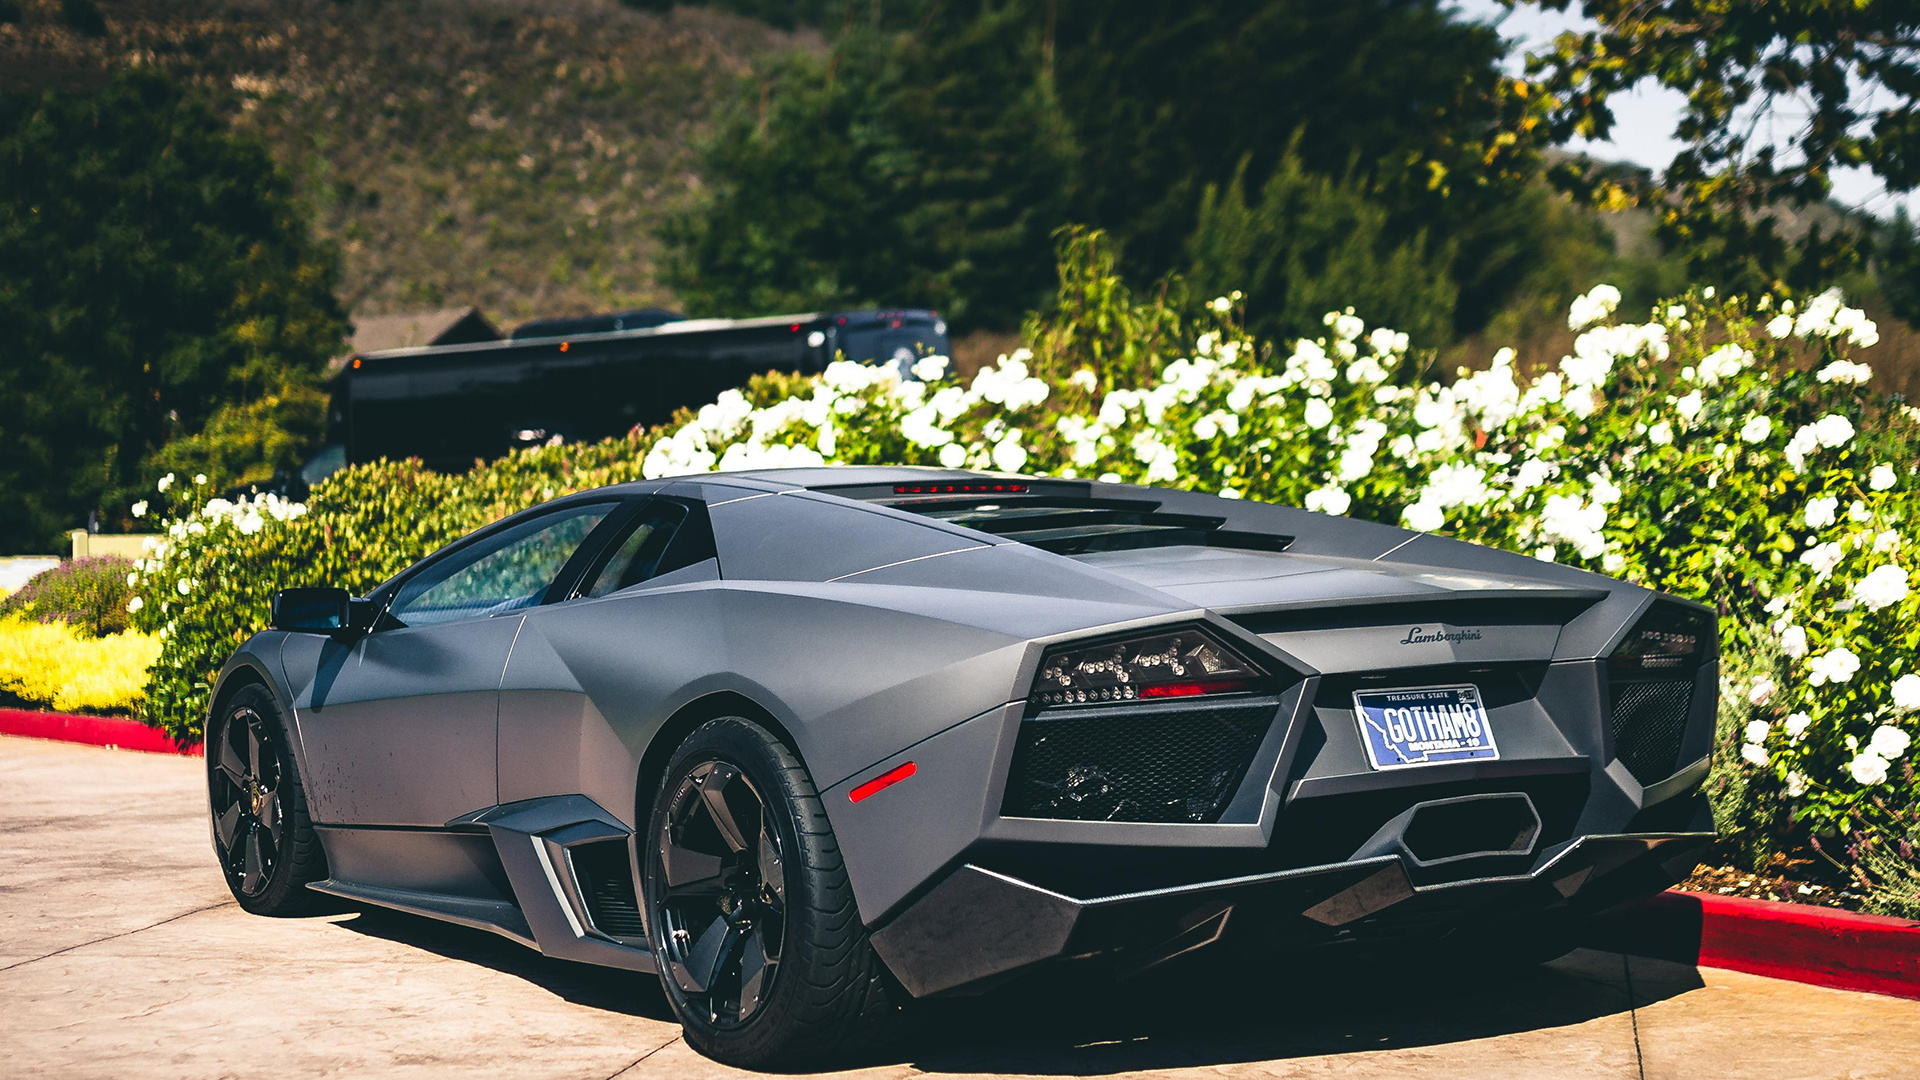 HD Reventon wallpapers, Stunning backgrounds, Automotive excellence, Astonishing visuals, 1920x1080 Full HD Desktop